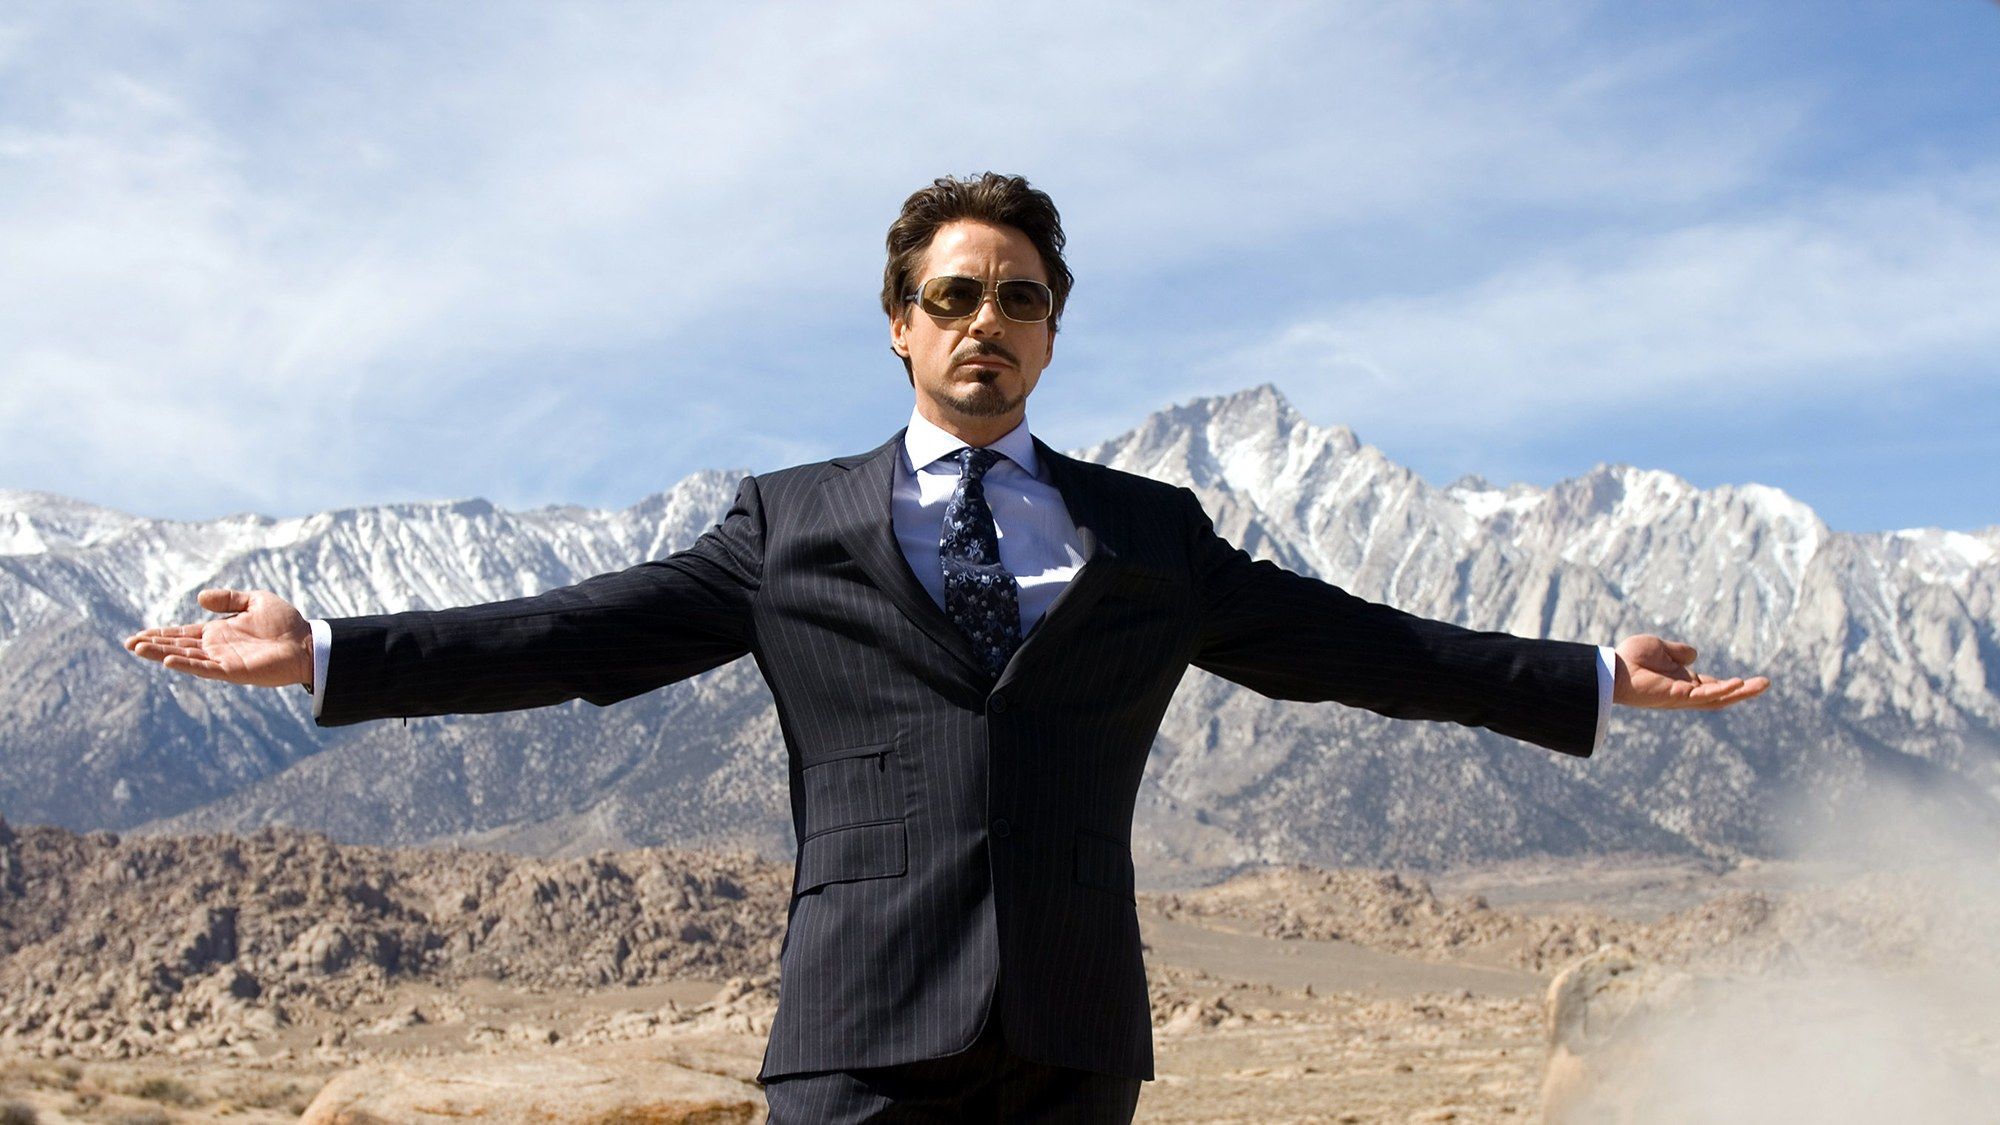 Tony Stark shows off during missile demonstration in Iron Man